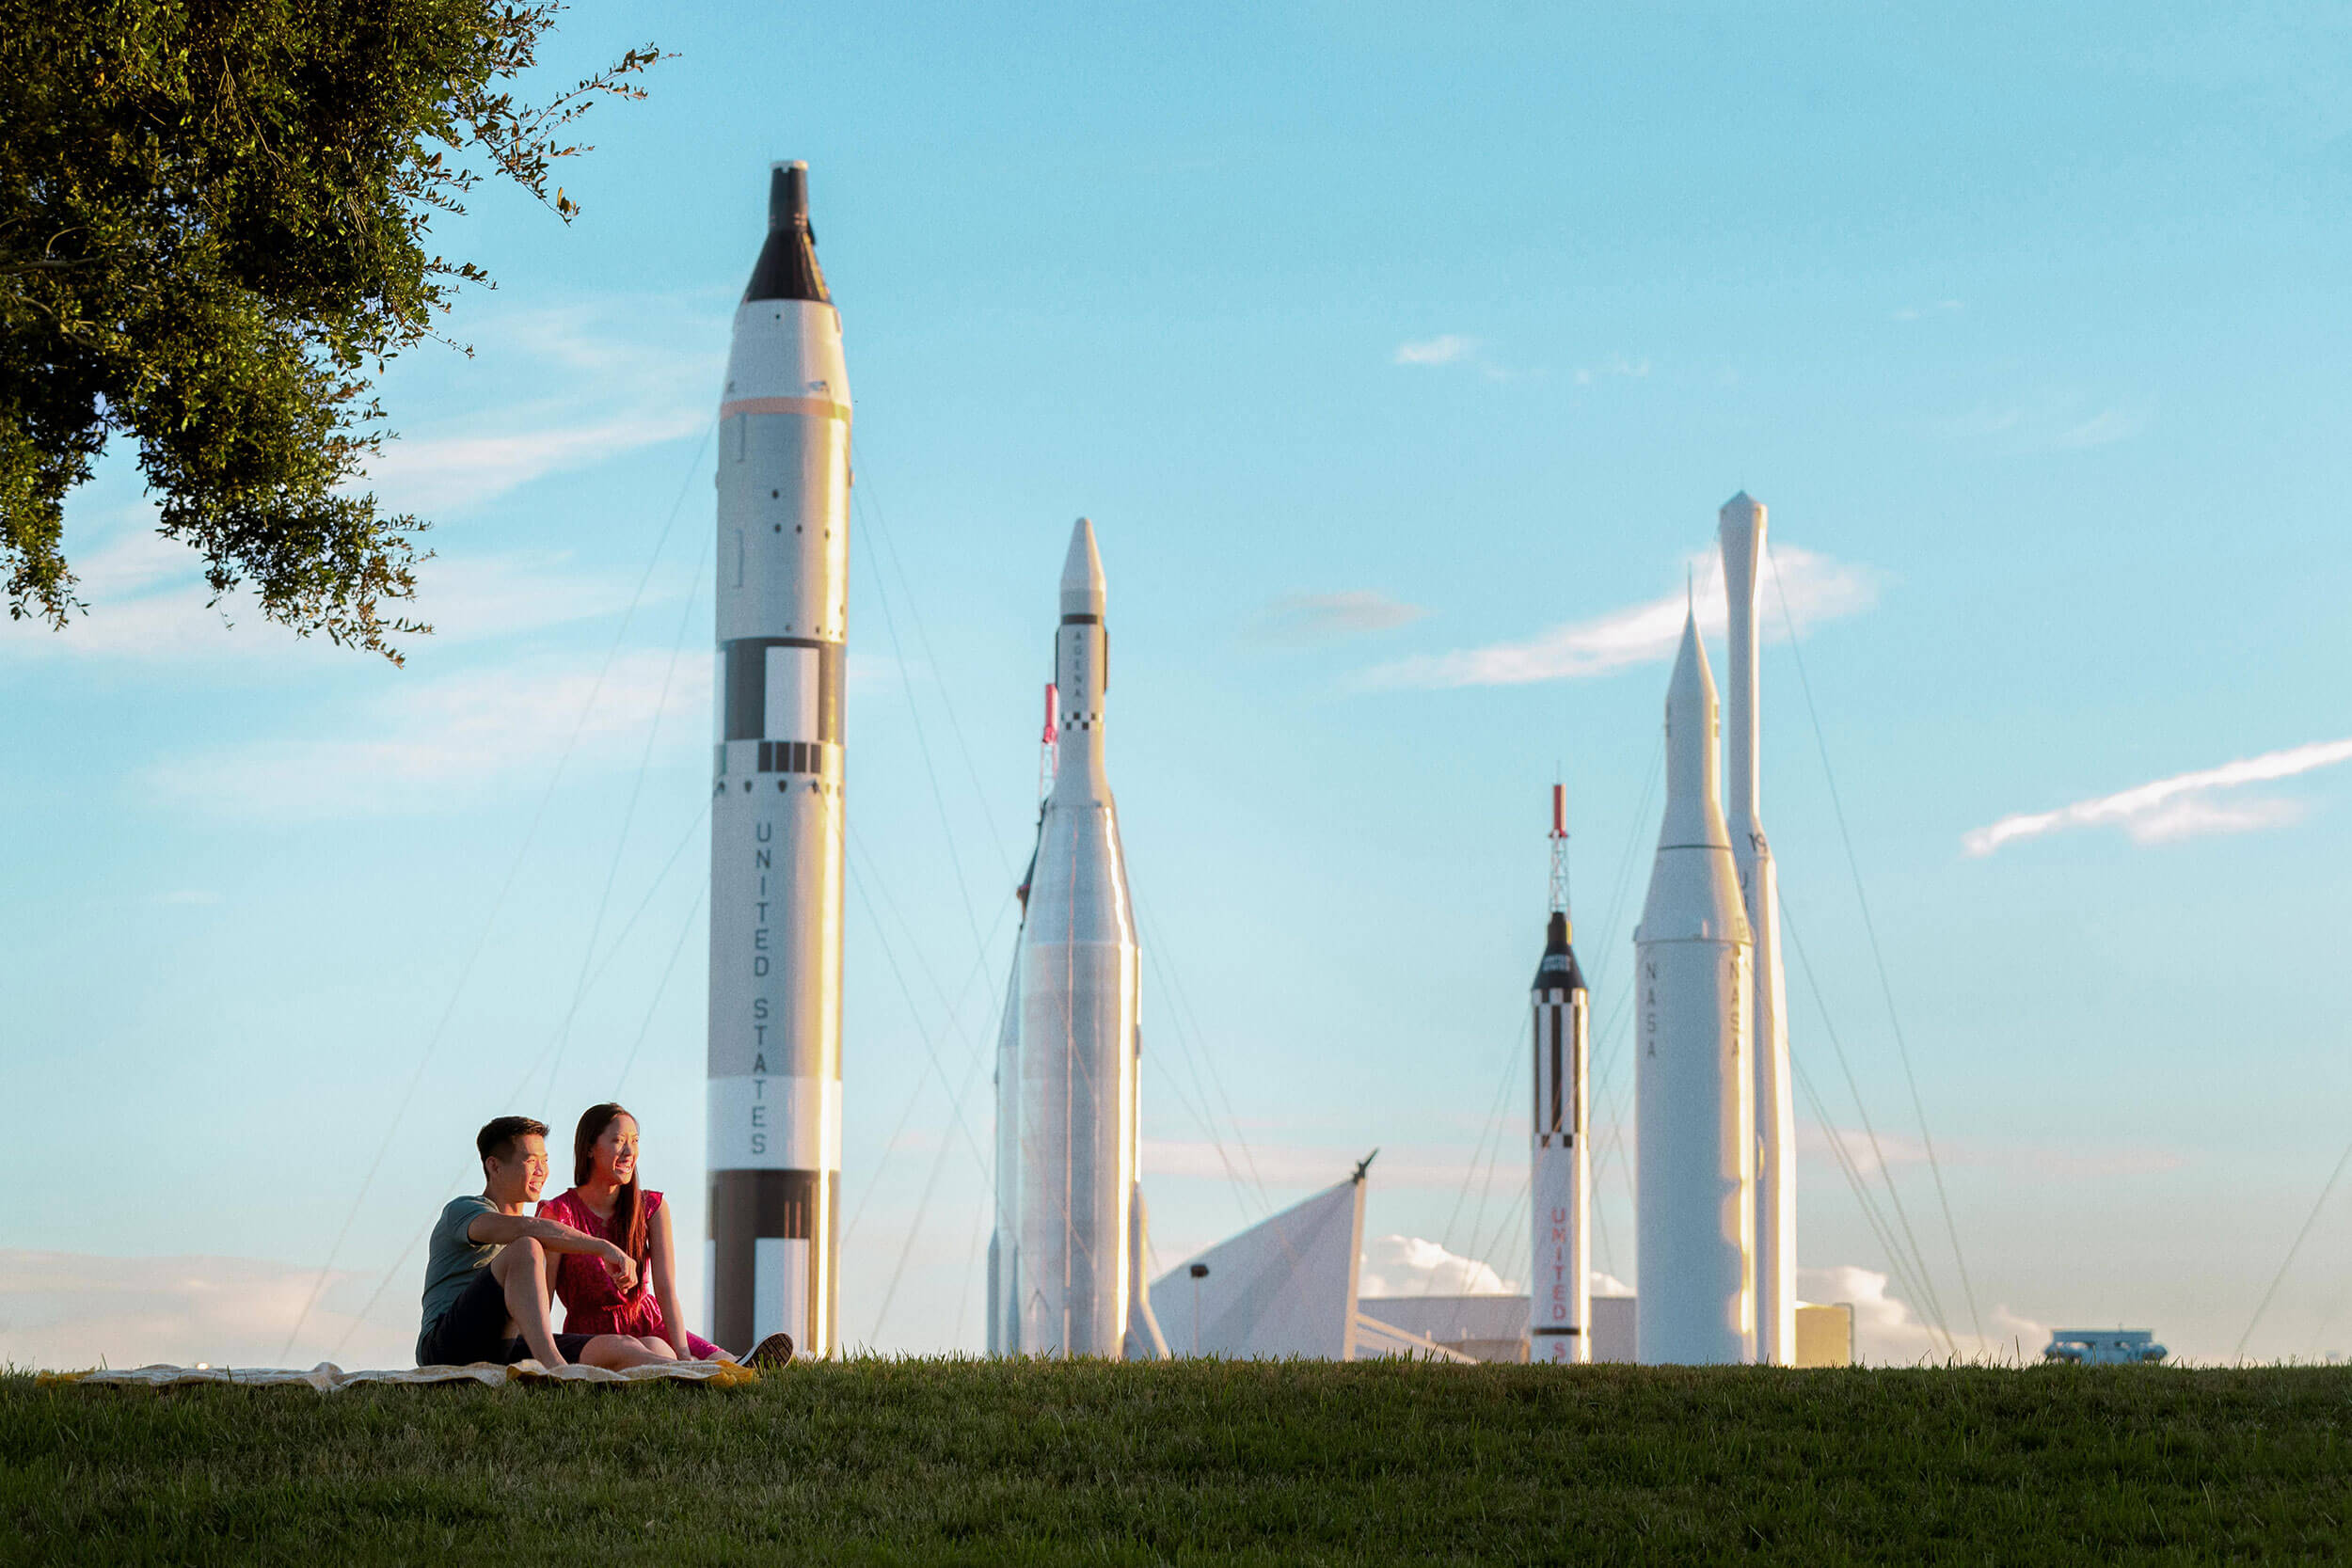 Couple sitting on grass in front of rockets.